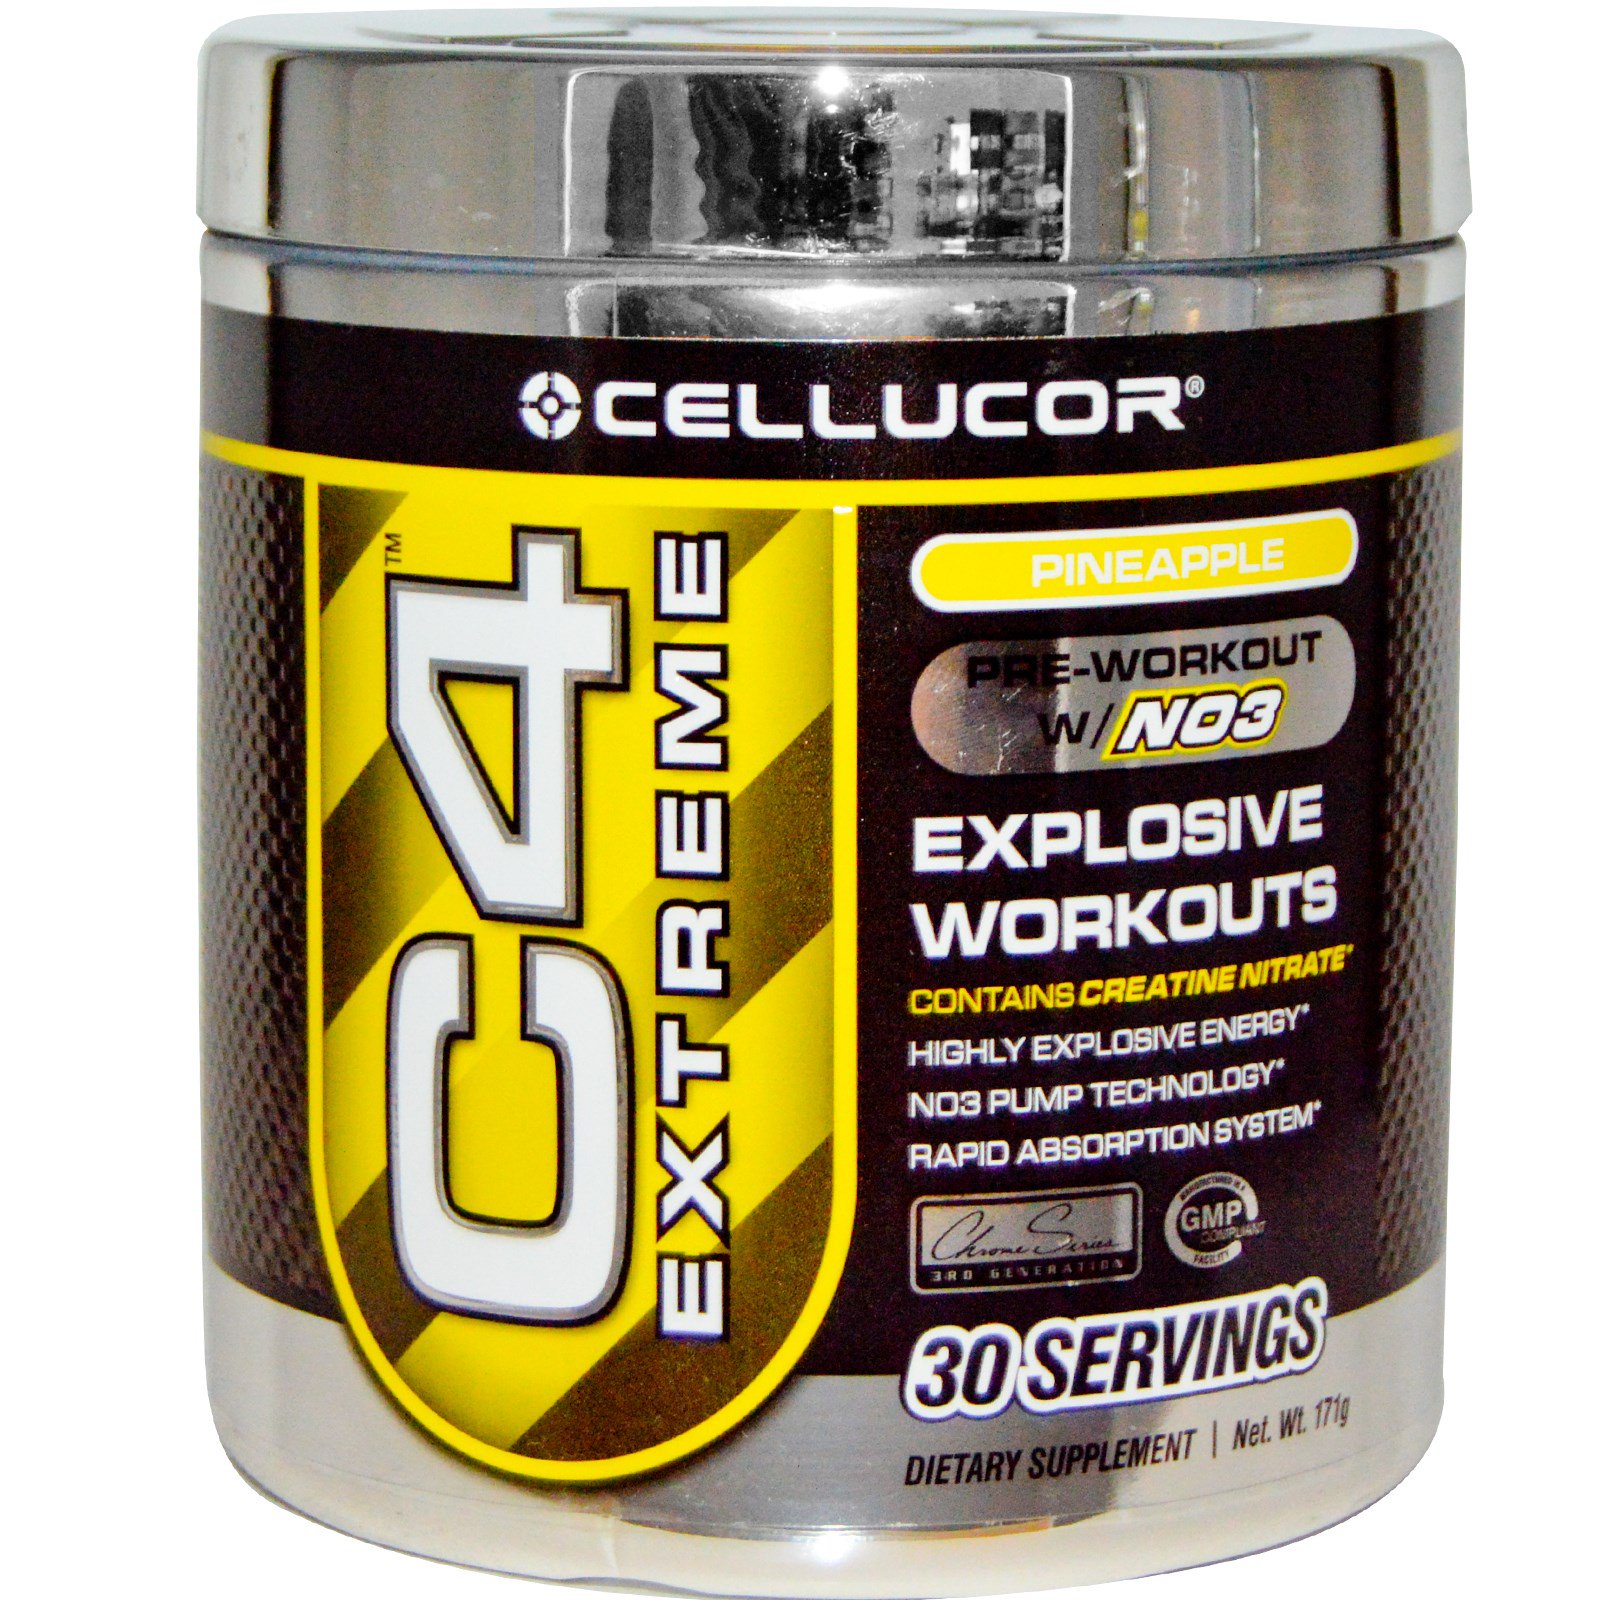 30 Minute Cellucor C4 Extreme Pre Workout Review for Burn Fat fast